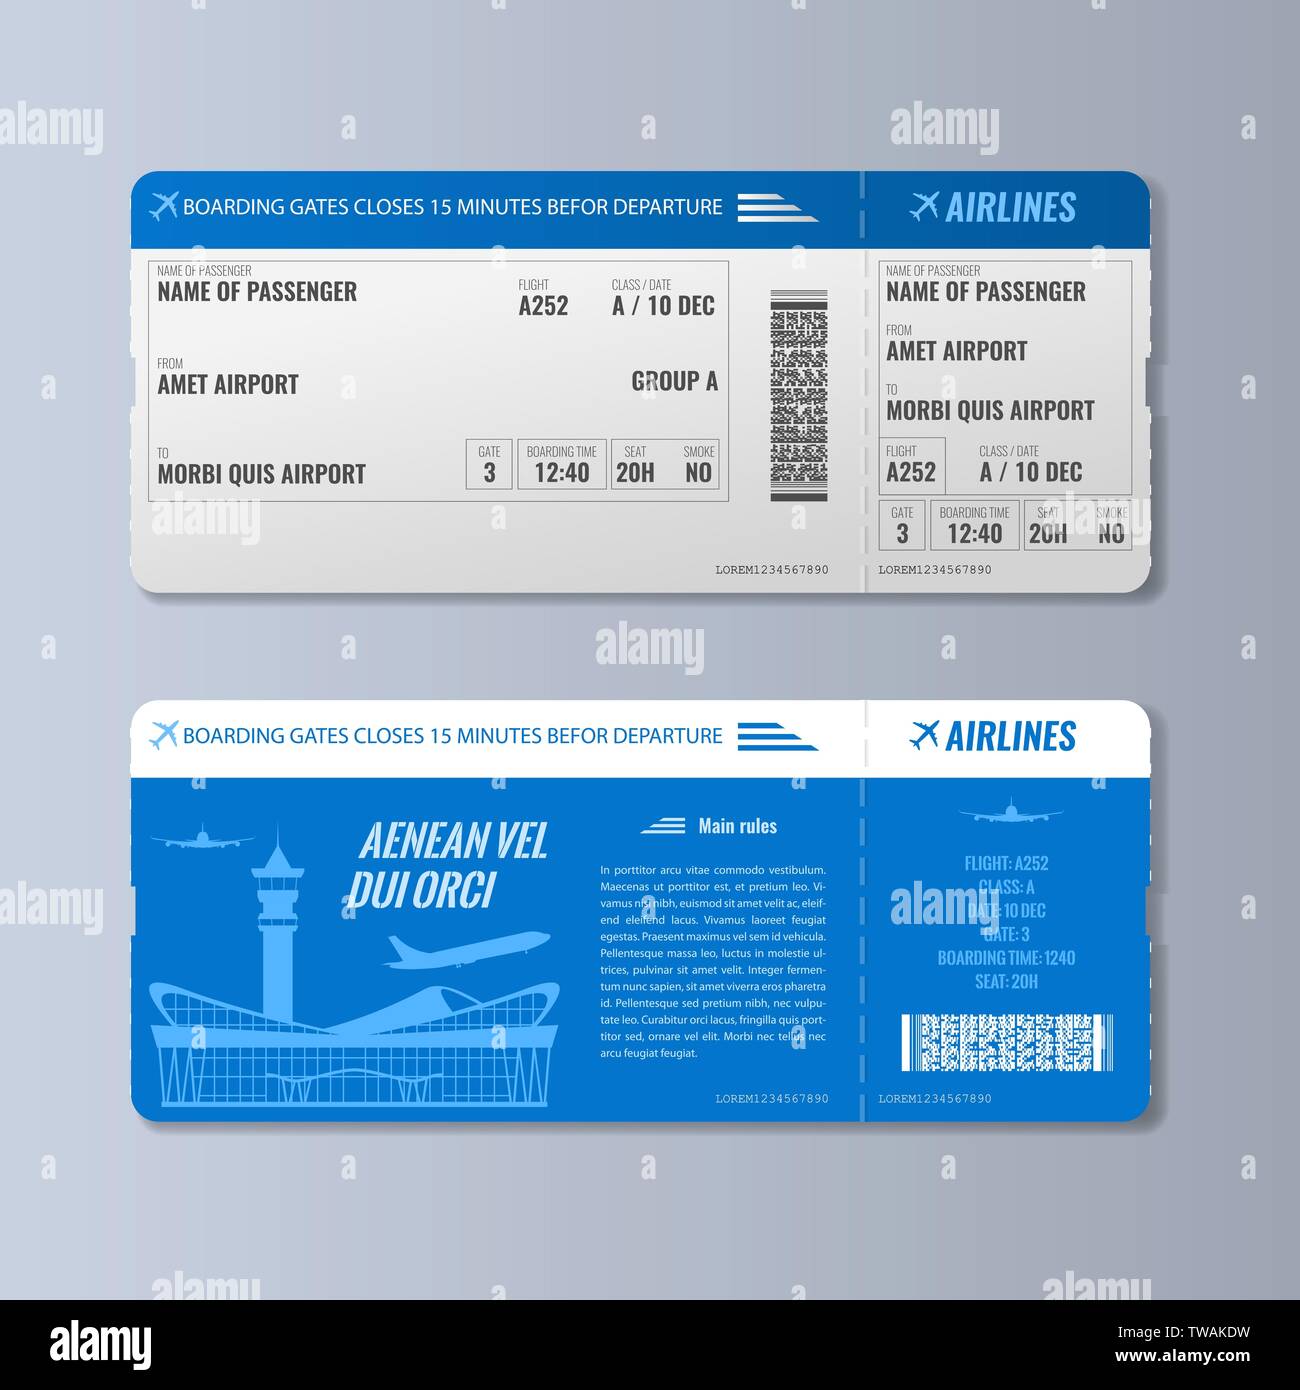 Airplane Boarding Pass Template from c8.alamy.com